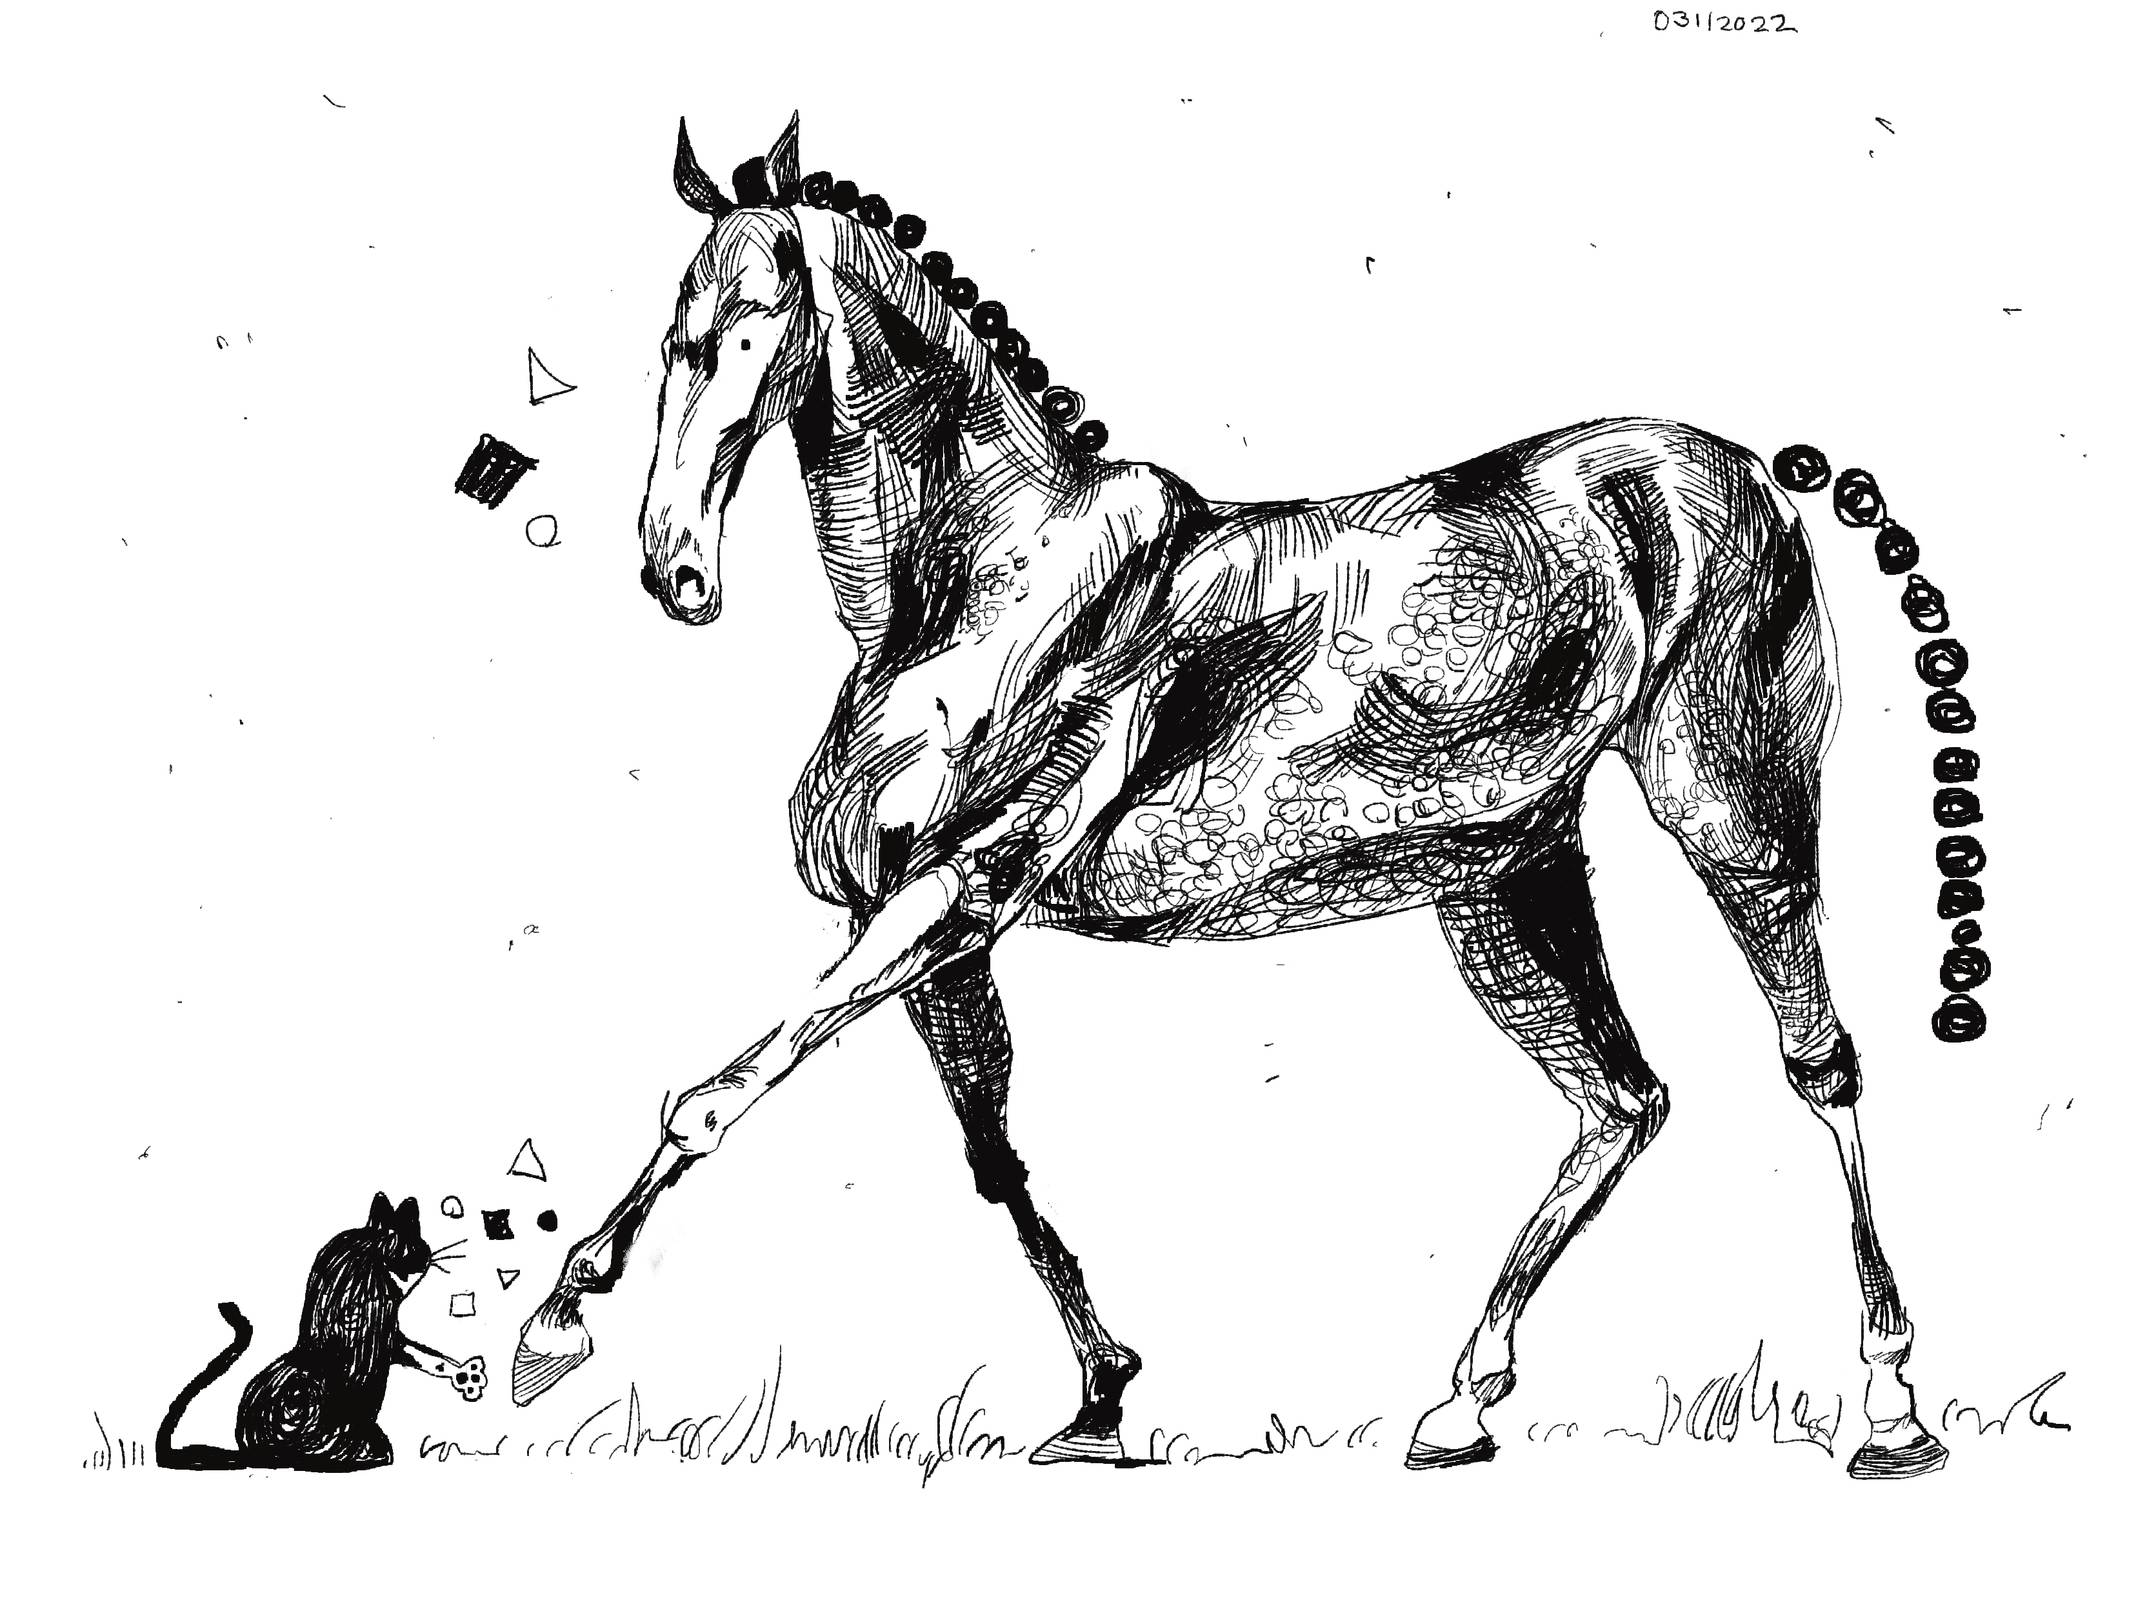 Line drawing of a dark horse and a tuxedo cat playing rock paper scissors, somehow. They are friends